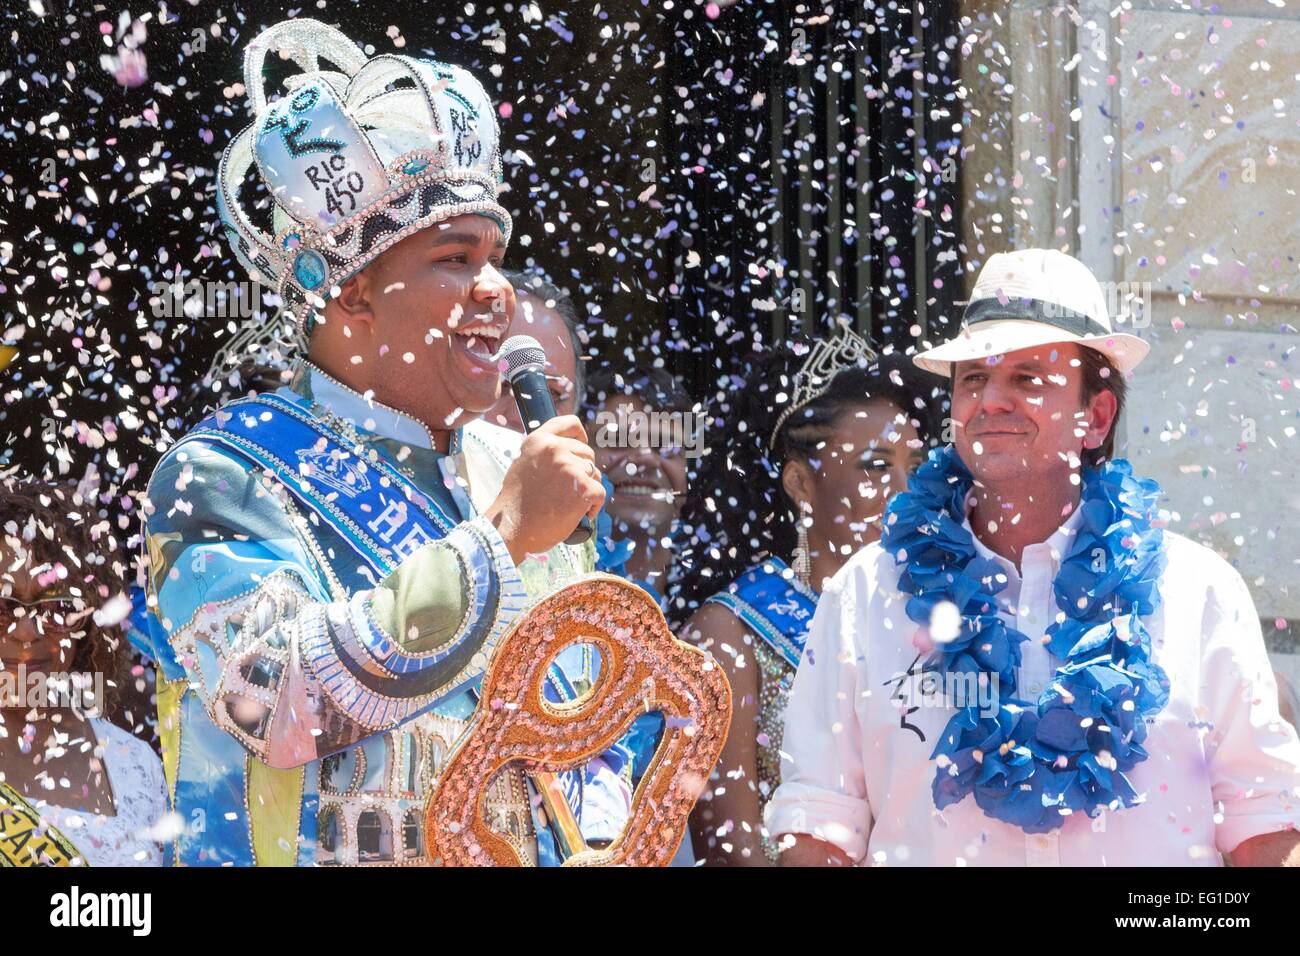 Rio De Janeiro, Brazil. 13th Feb, 2015. 'King Momo' Wilson Neto (L) speaks during the official opening ceremony of Rio de Janeiro's 2015 Carnival at the City Palace in Rio de Janeiro, Brazil, Feb. 13, 2015. © Xu Zijian/Xinhua/Alamy Live News Stock Photo